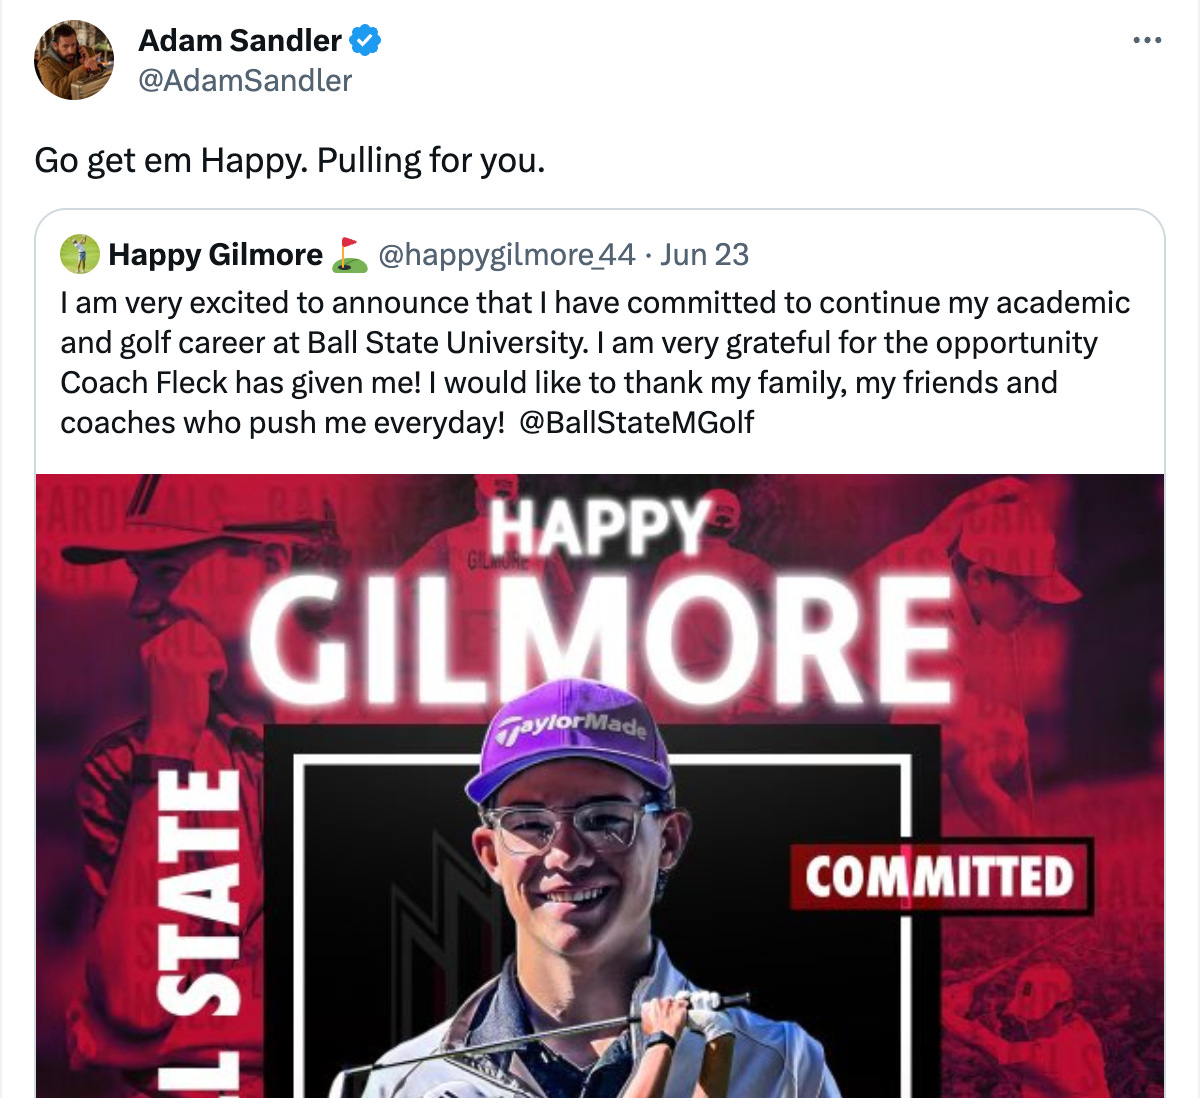 Tweet from @AdamSandler congratulating Happy Gilmore on committing to play golf at Ball State